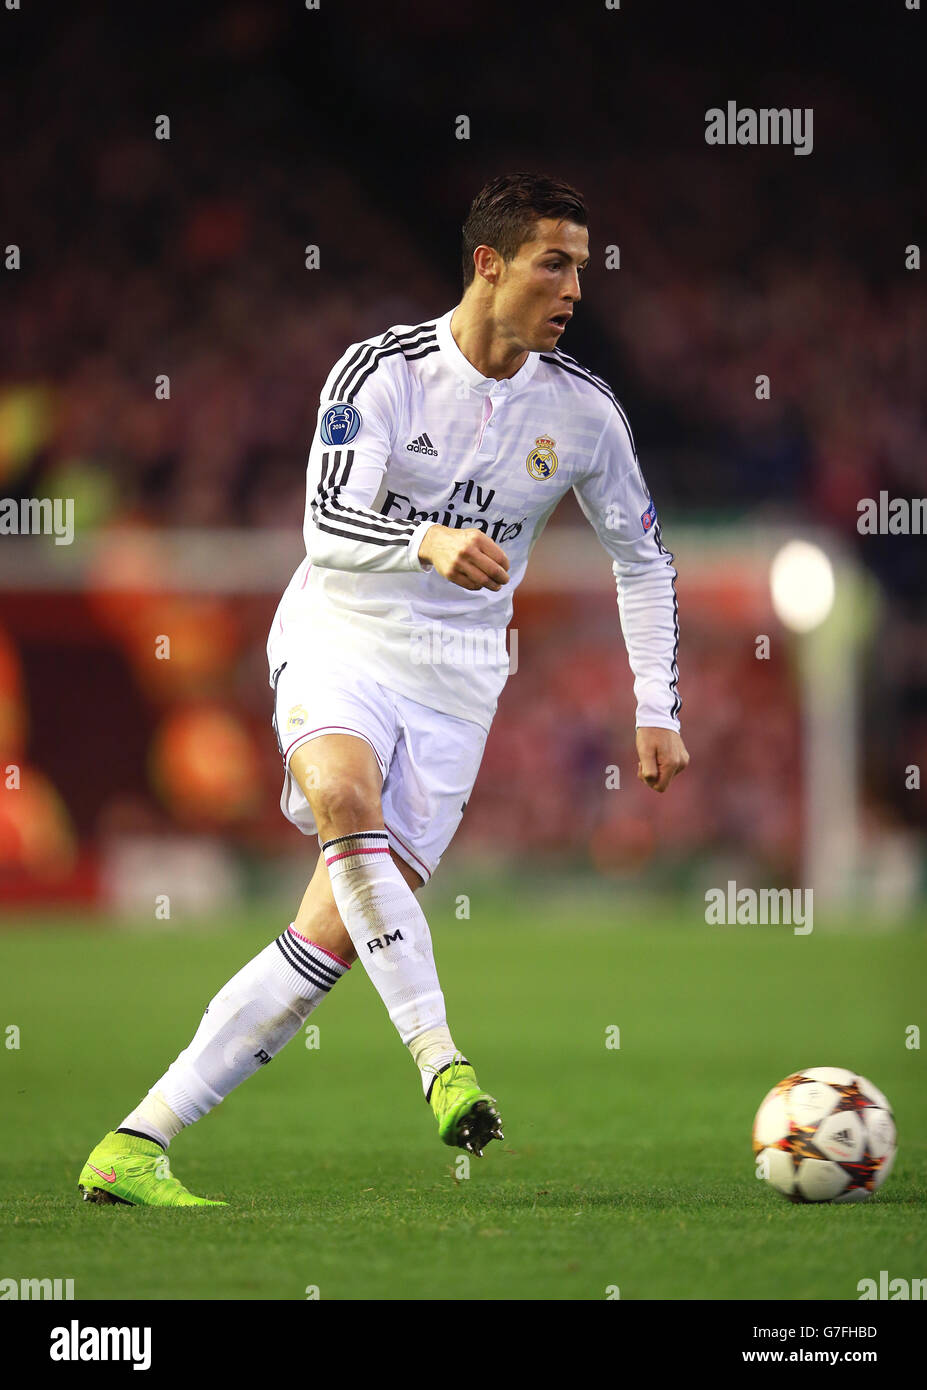 Football - Ligue des champions de l'UEFA - Groupe B - Liverpool / Real Madrid - Anfield.Cristiano Ronaldo du Real Madrid lors du match de la Ligue des champions de l'UEFA à Anfield, Liverpool. Banque D'Images